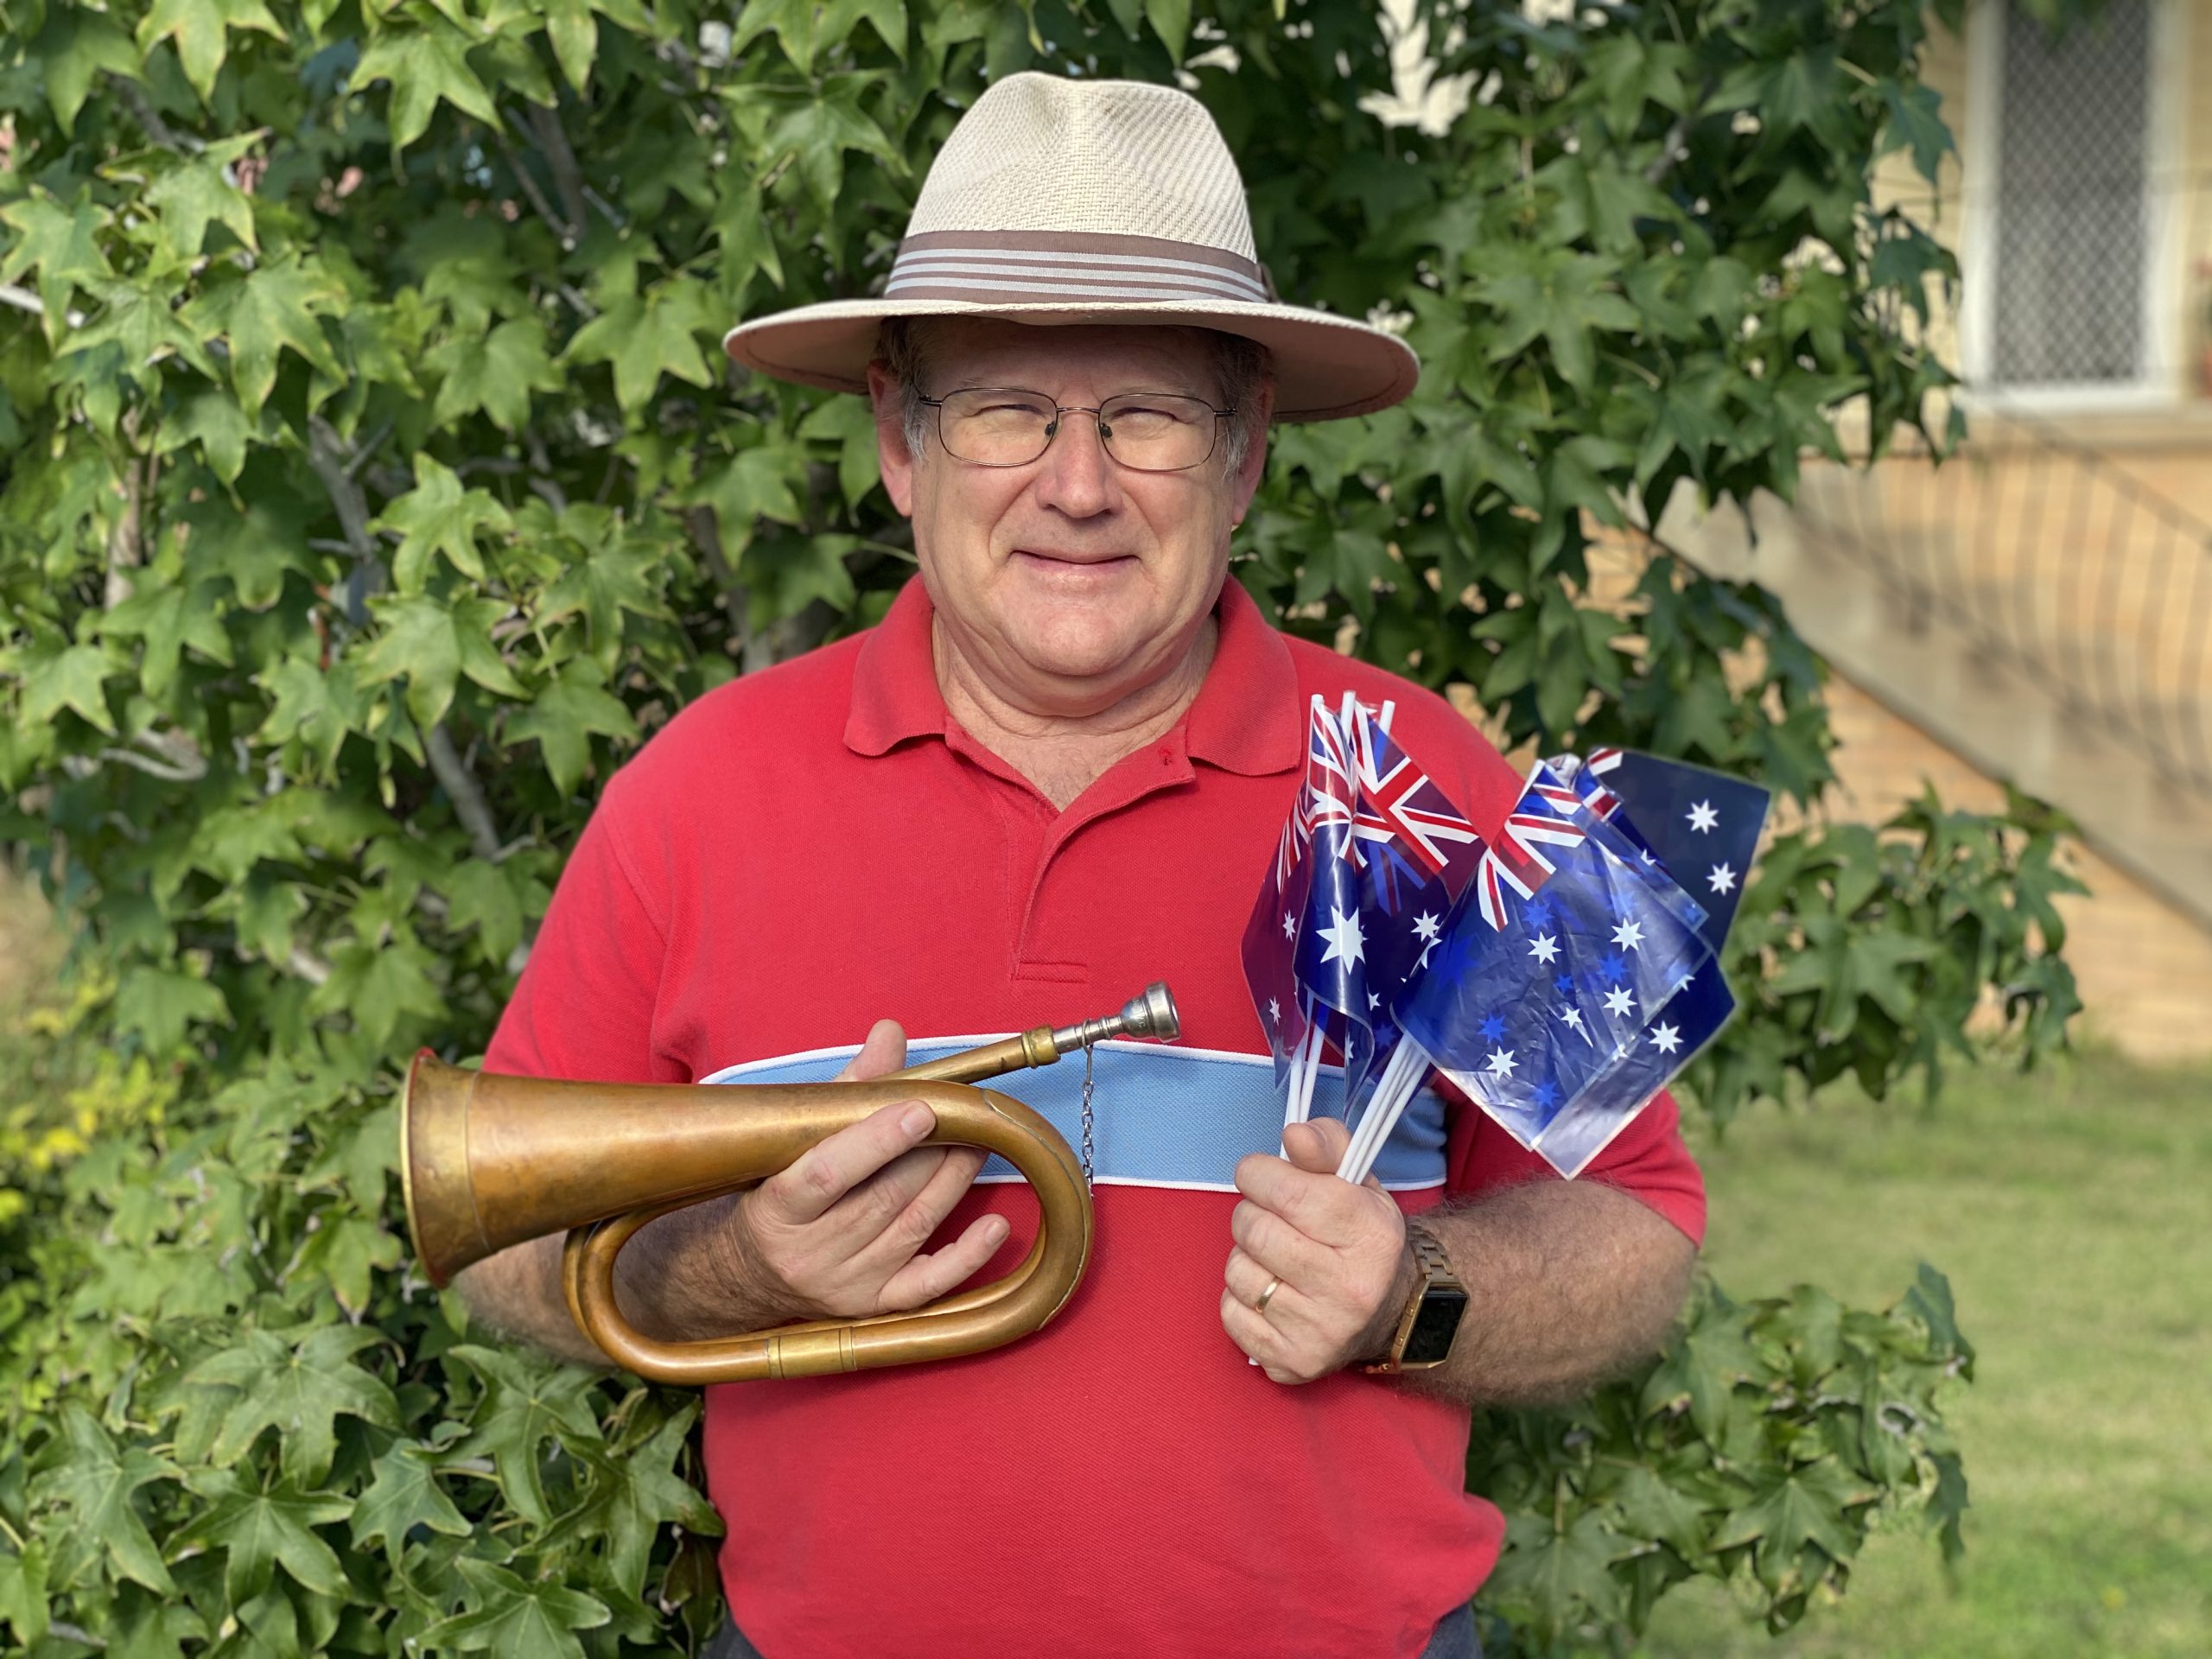 Wave your flag and join the Anzac Day salute from home